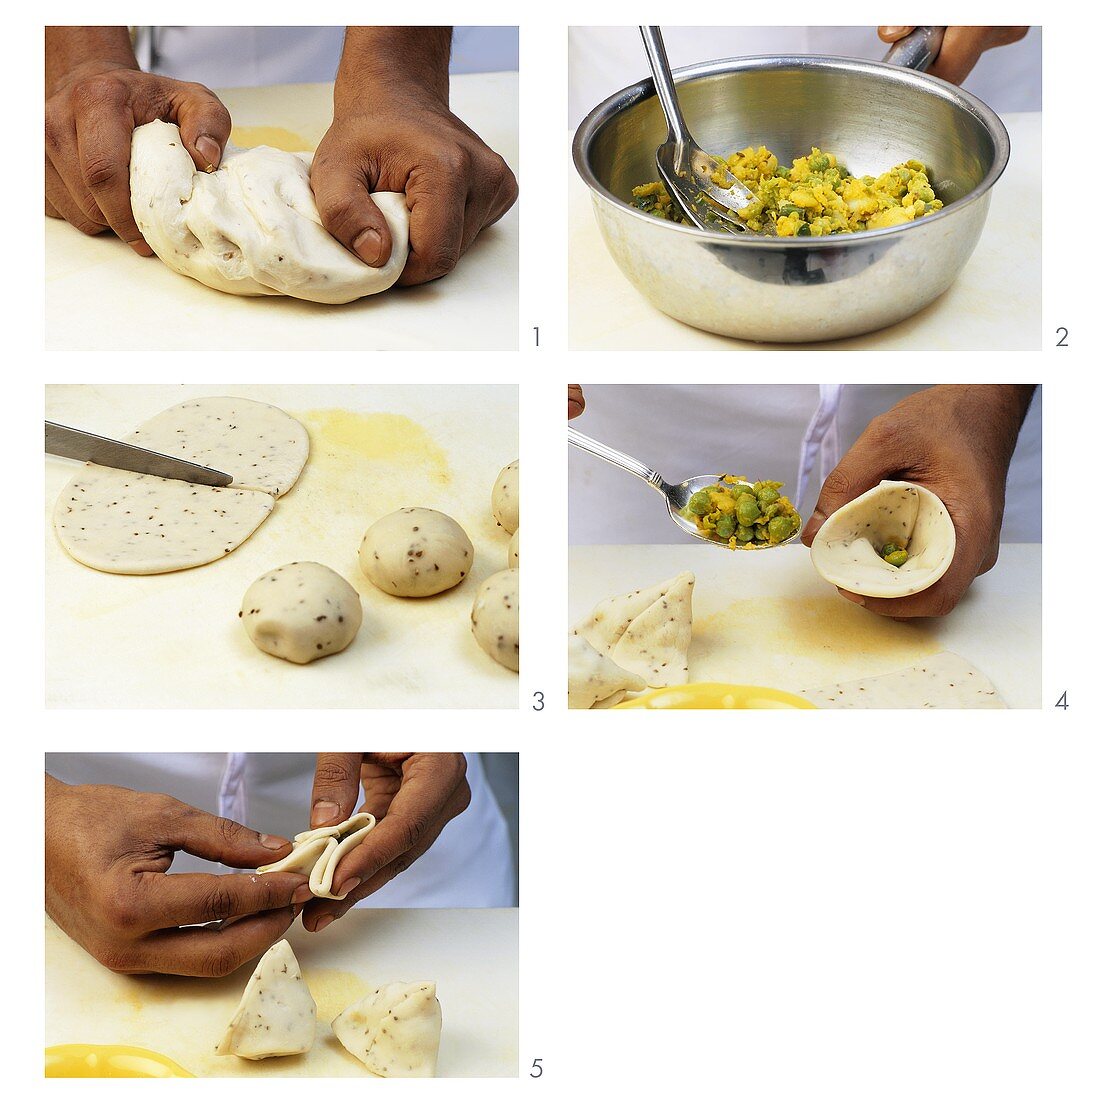 Making samosas with pea filling